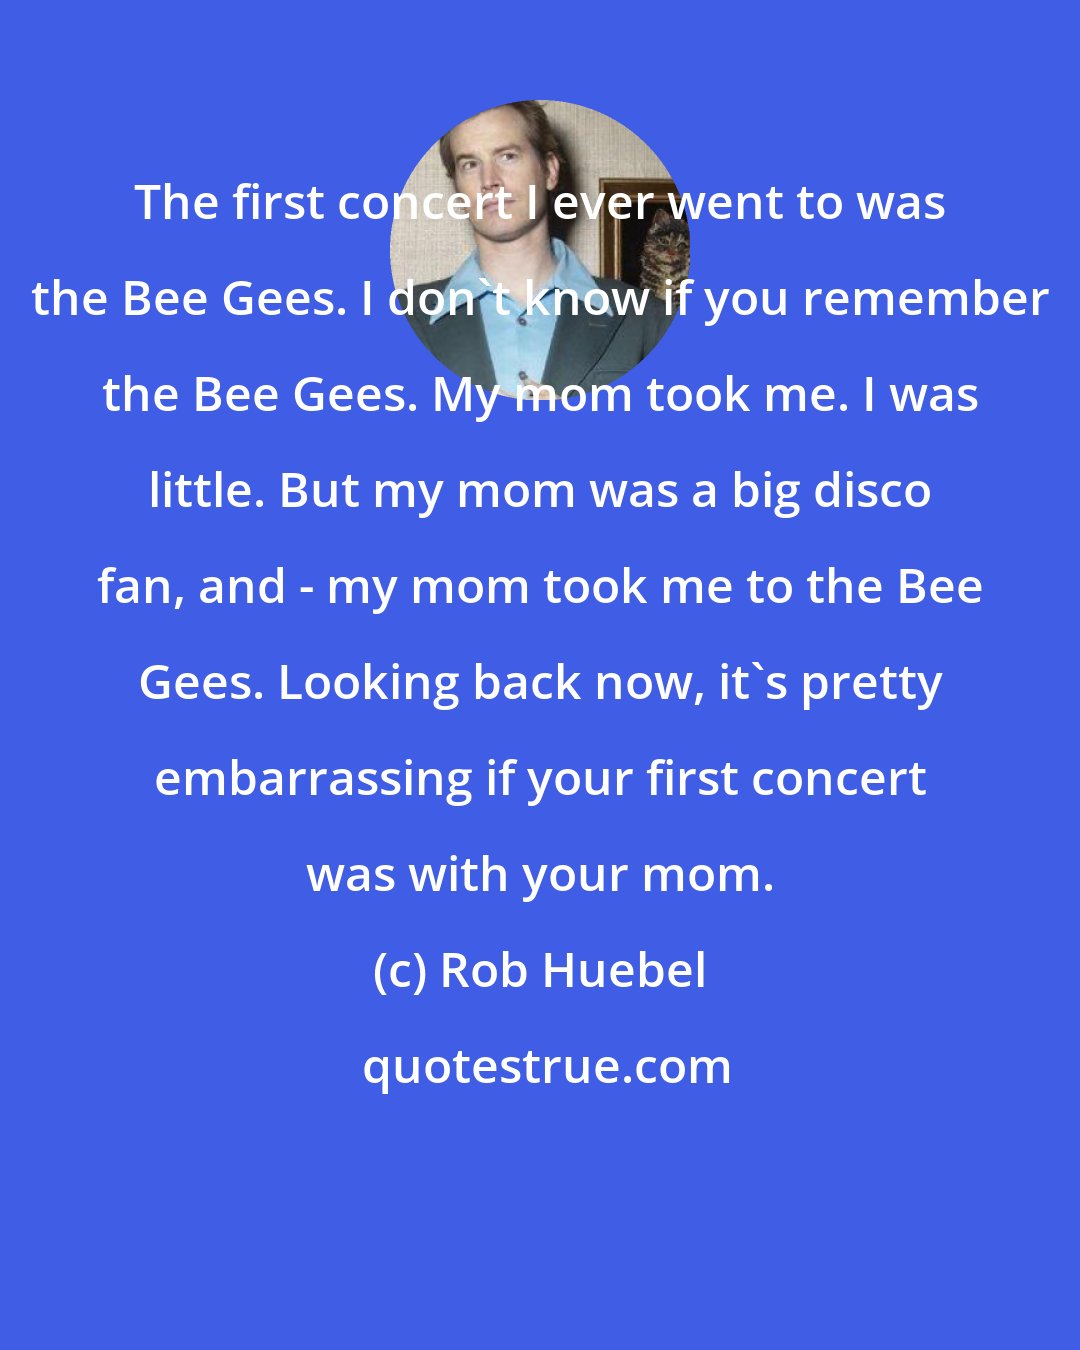 Rob Huebel: The first concert I ever went to was the Bee Gees. I don't know if you remember the Bee Gees. My mom took me. I was little. But my mom was a big disco fan, and - my mom took me to the Bee Gees. Looking back now, it's pretty embarrassing if your first concert was with your mom.